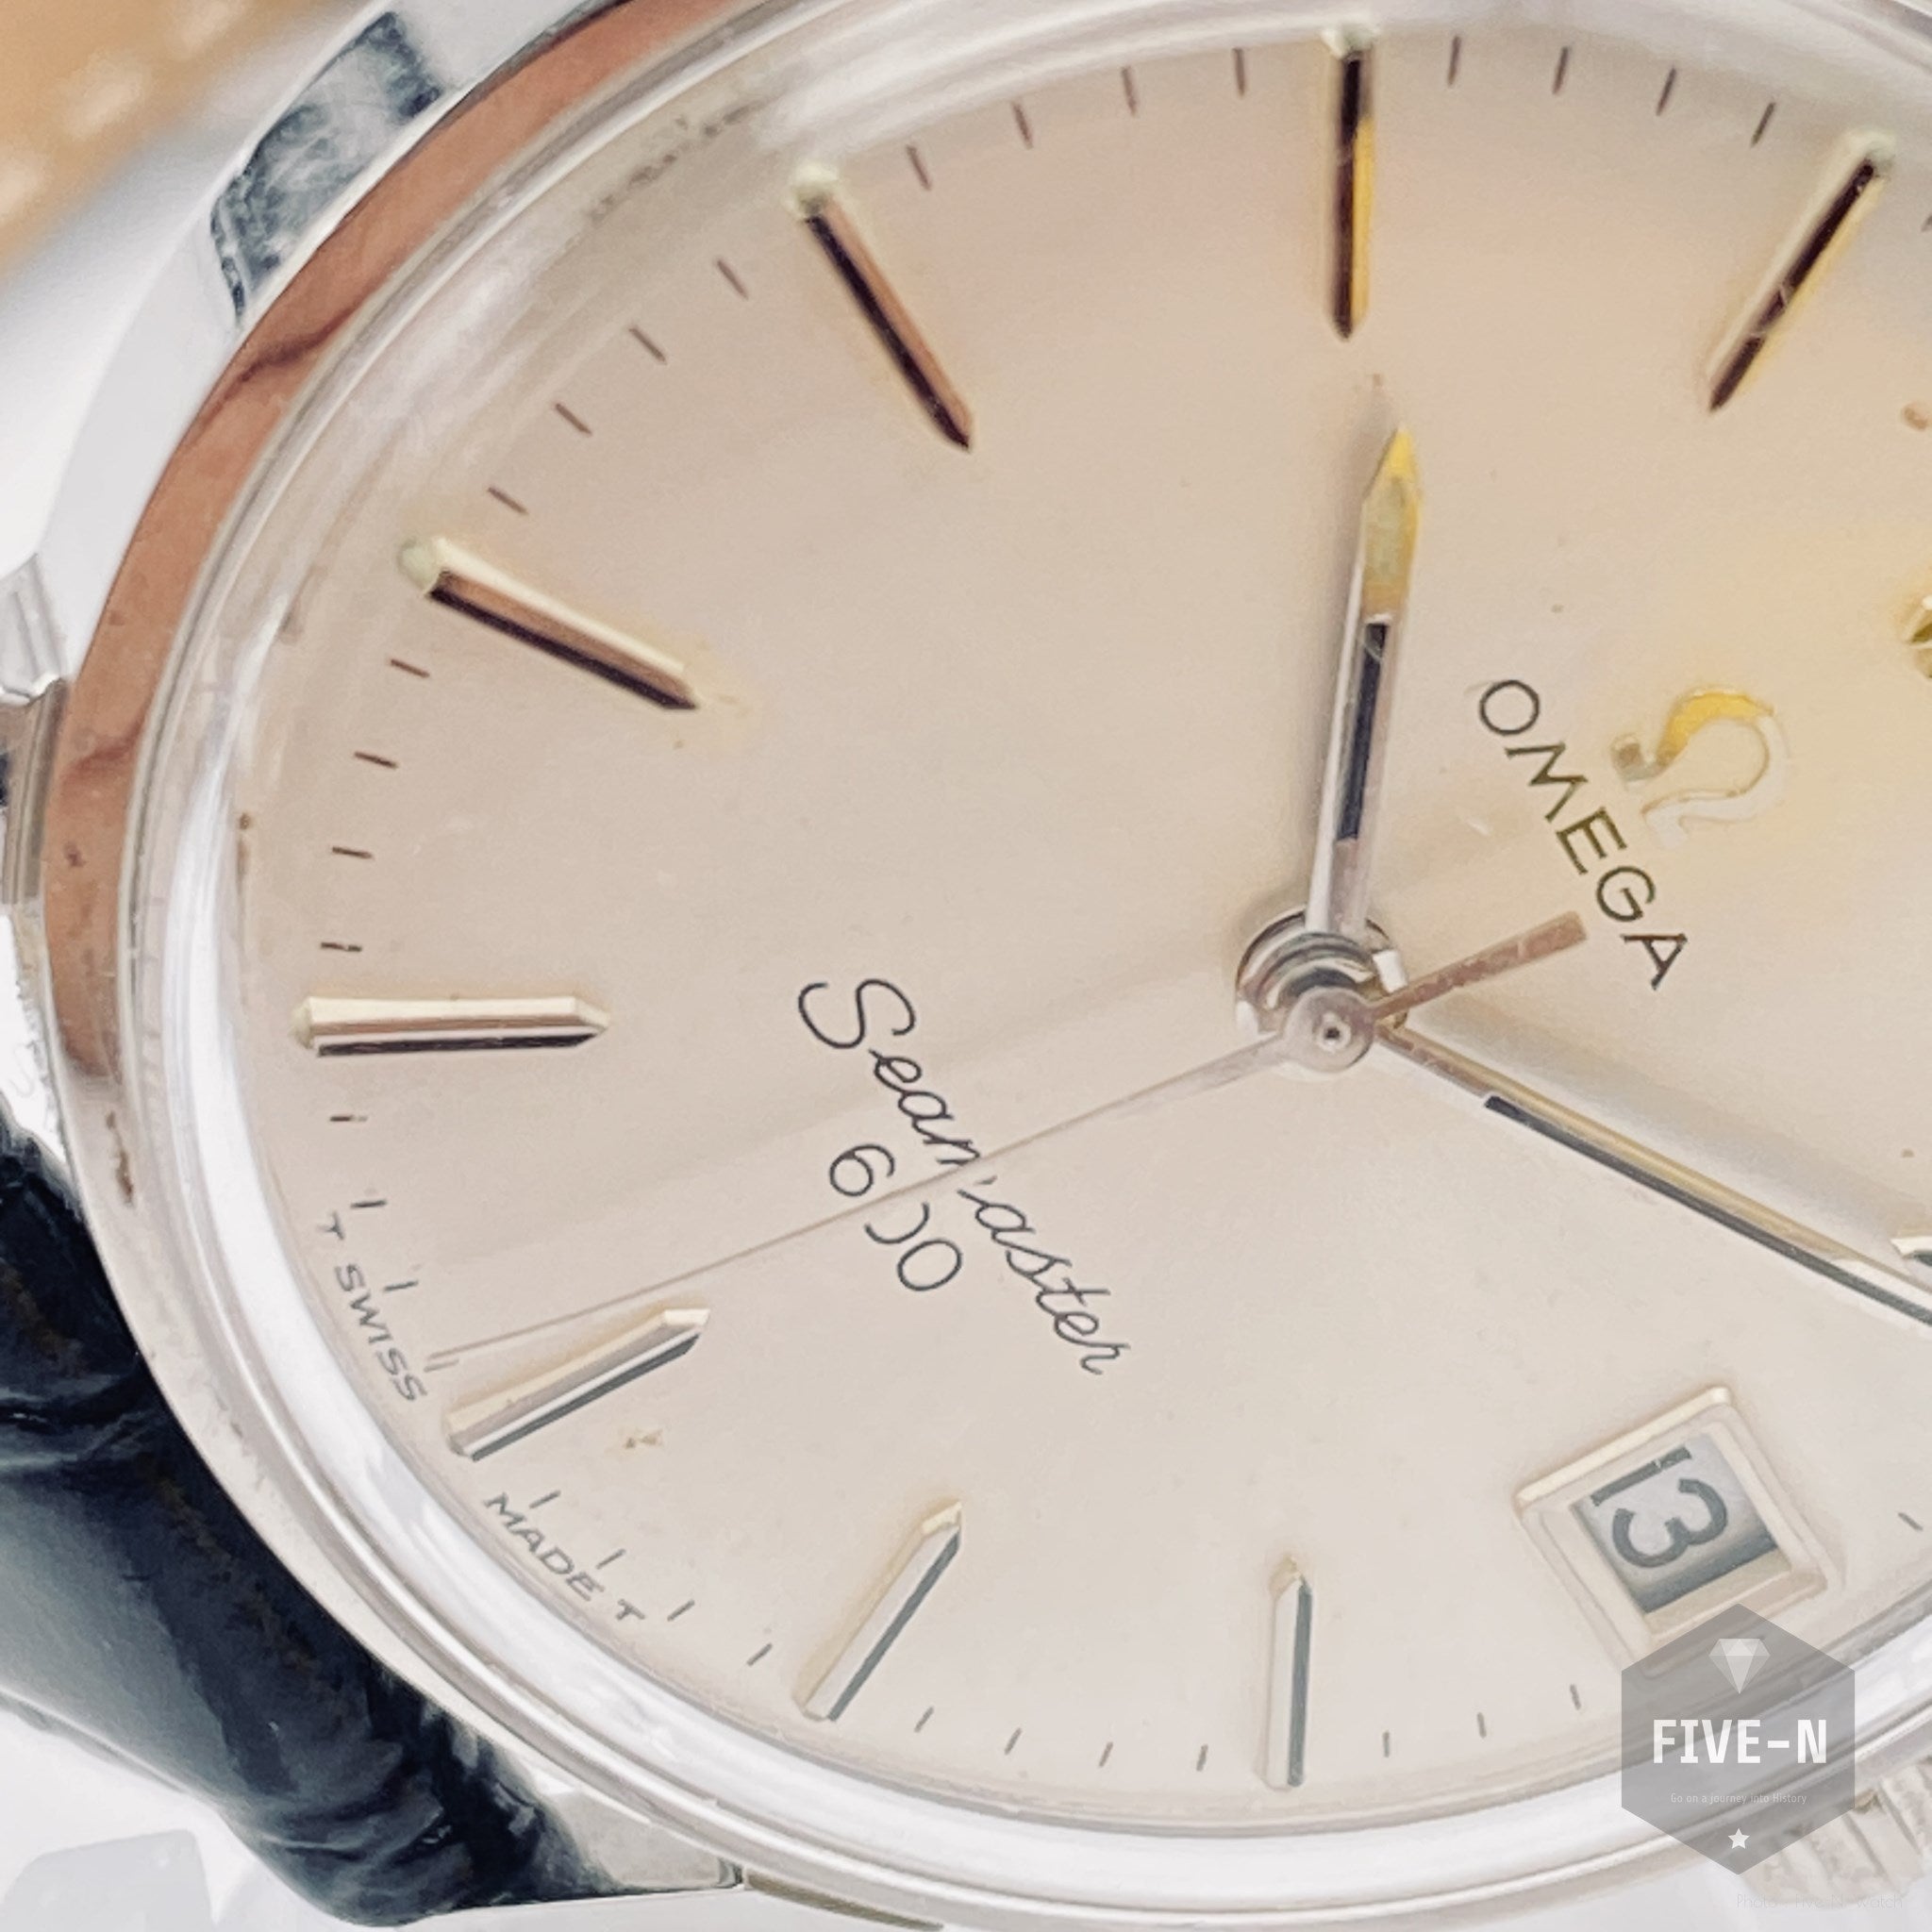 OMEGA Seamaster 600 DATE オメガ・シーマスター(Pre-Owned) | Five-N ...